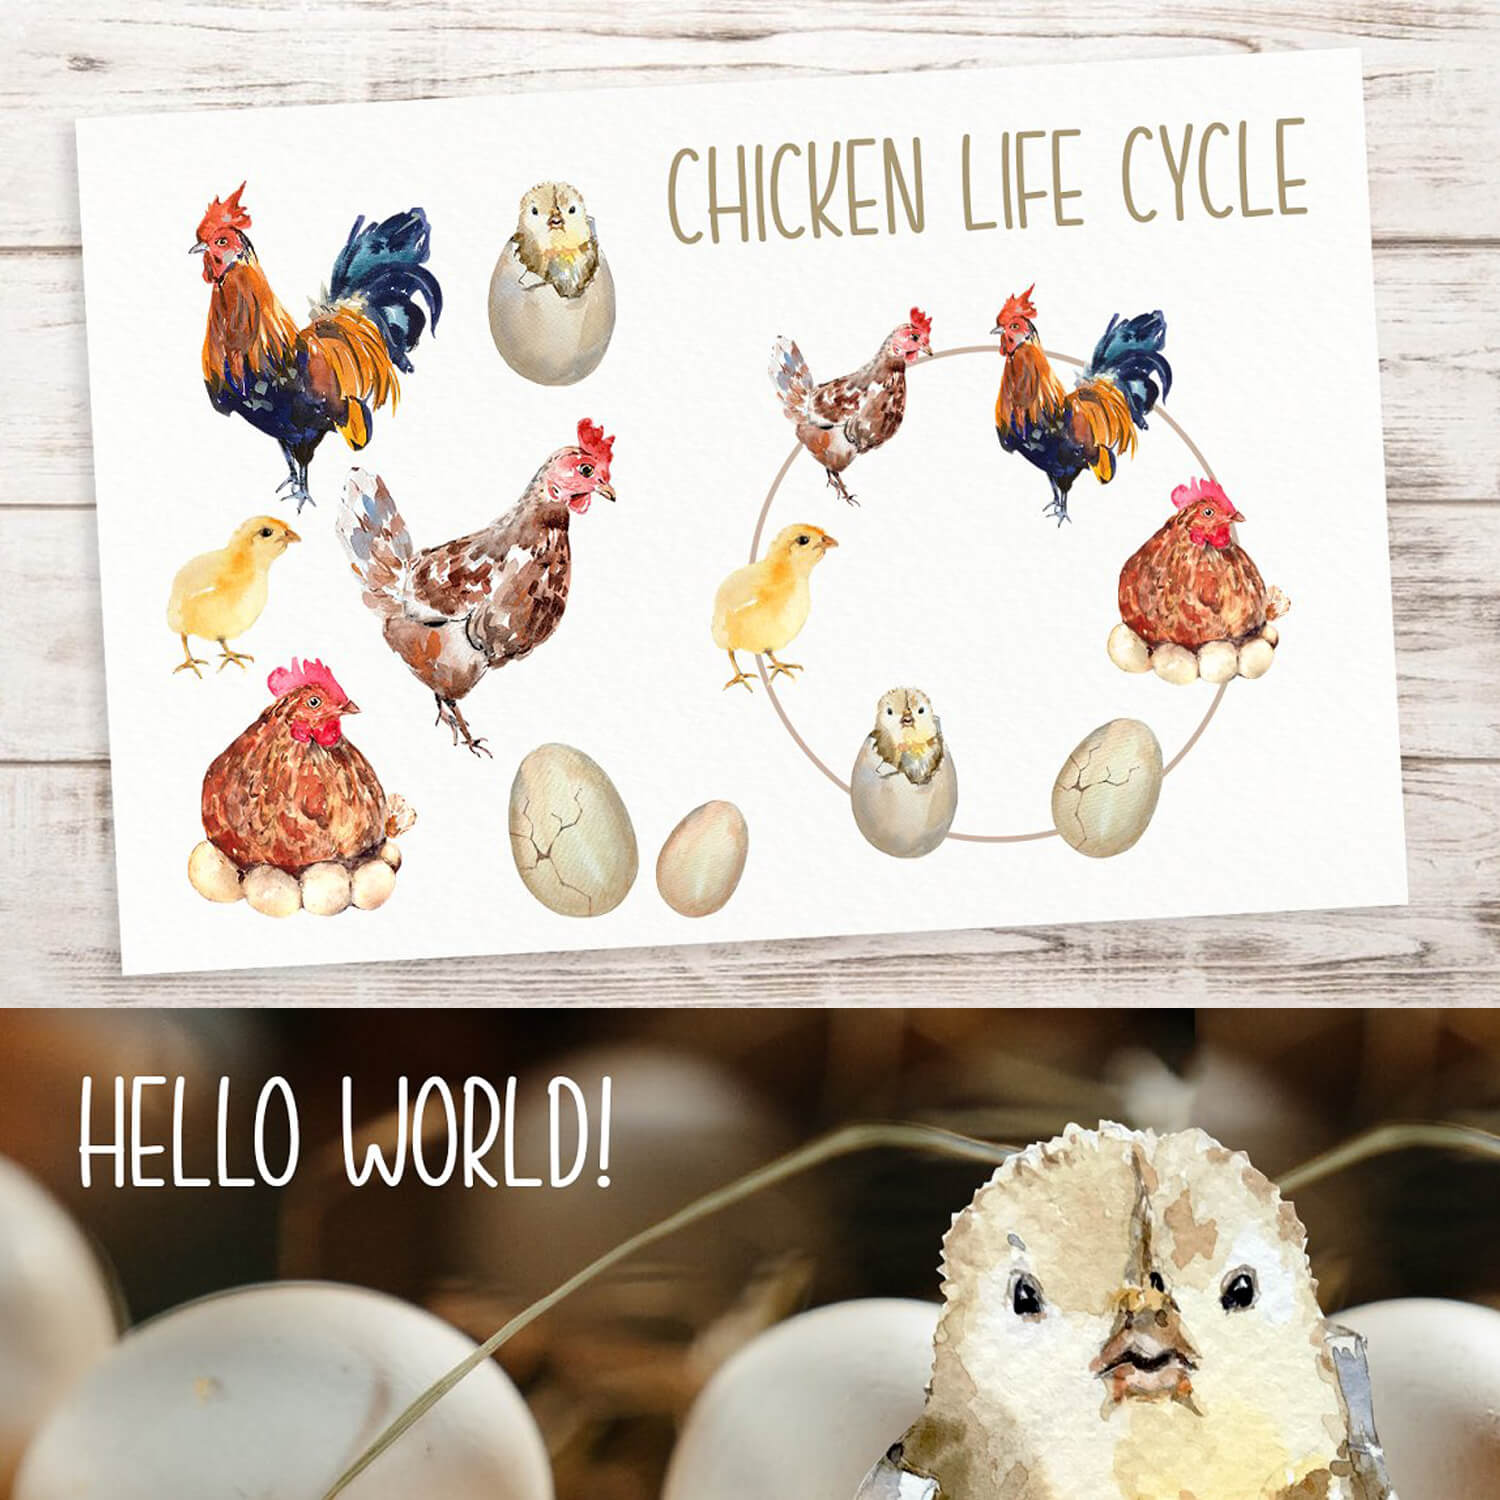 Pictures with the life cycle of a chick.